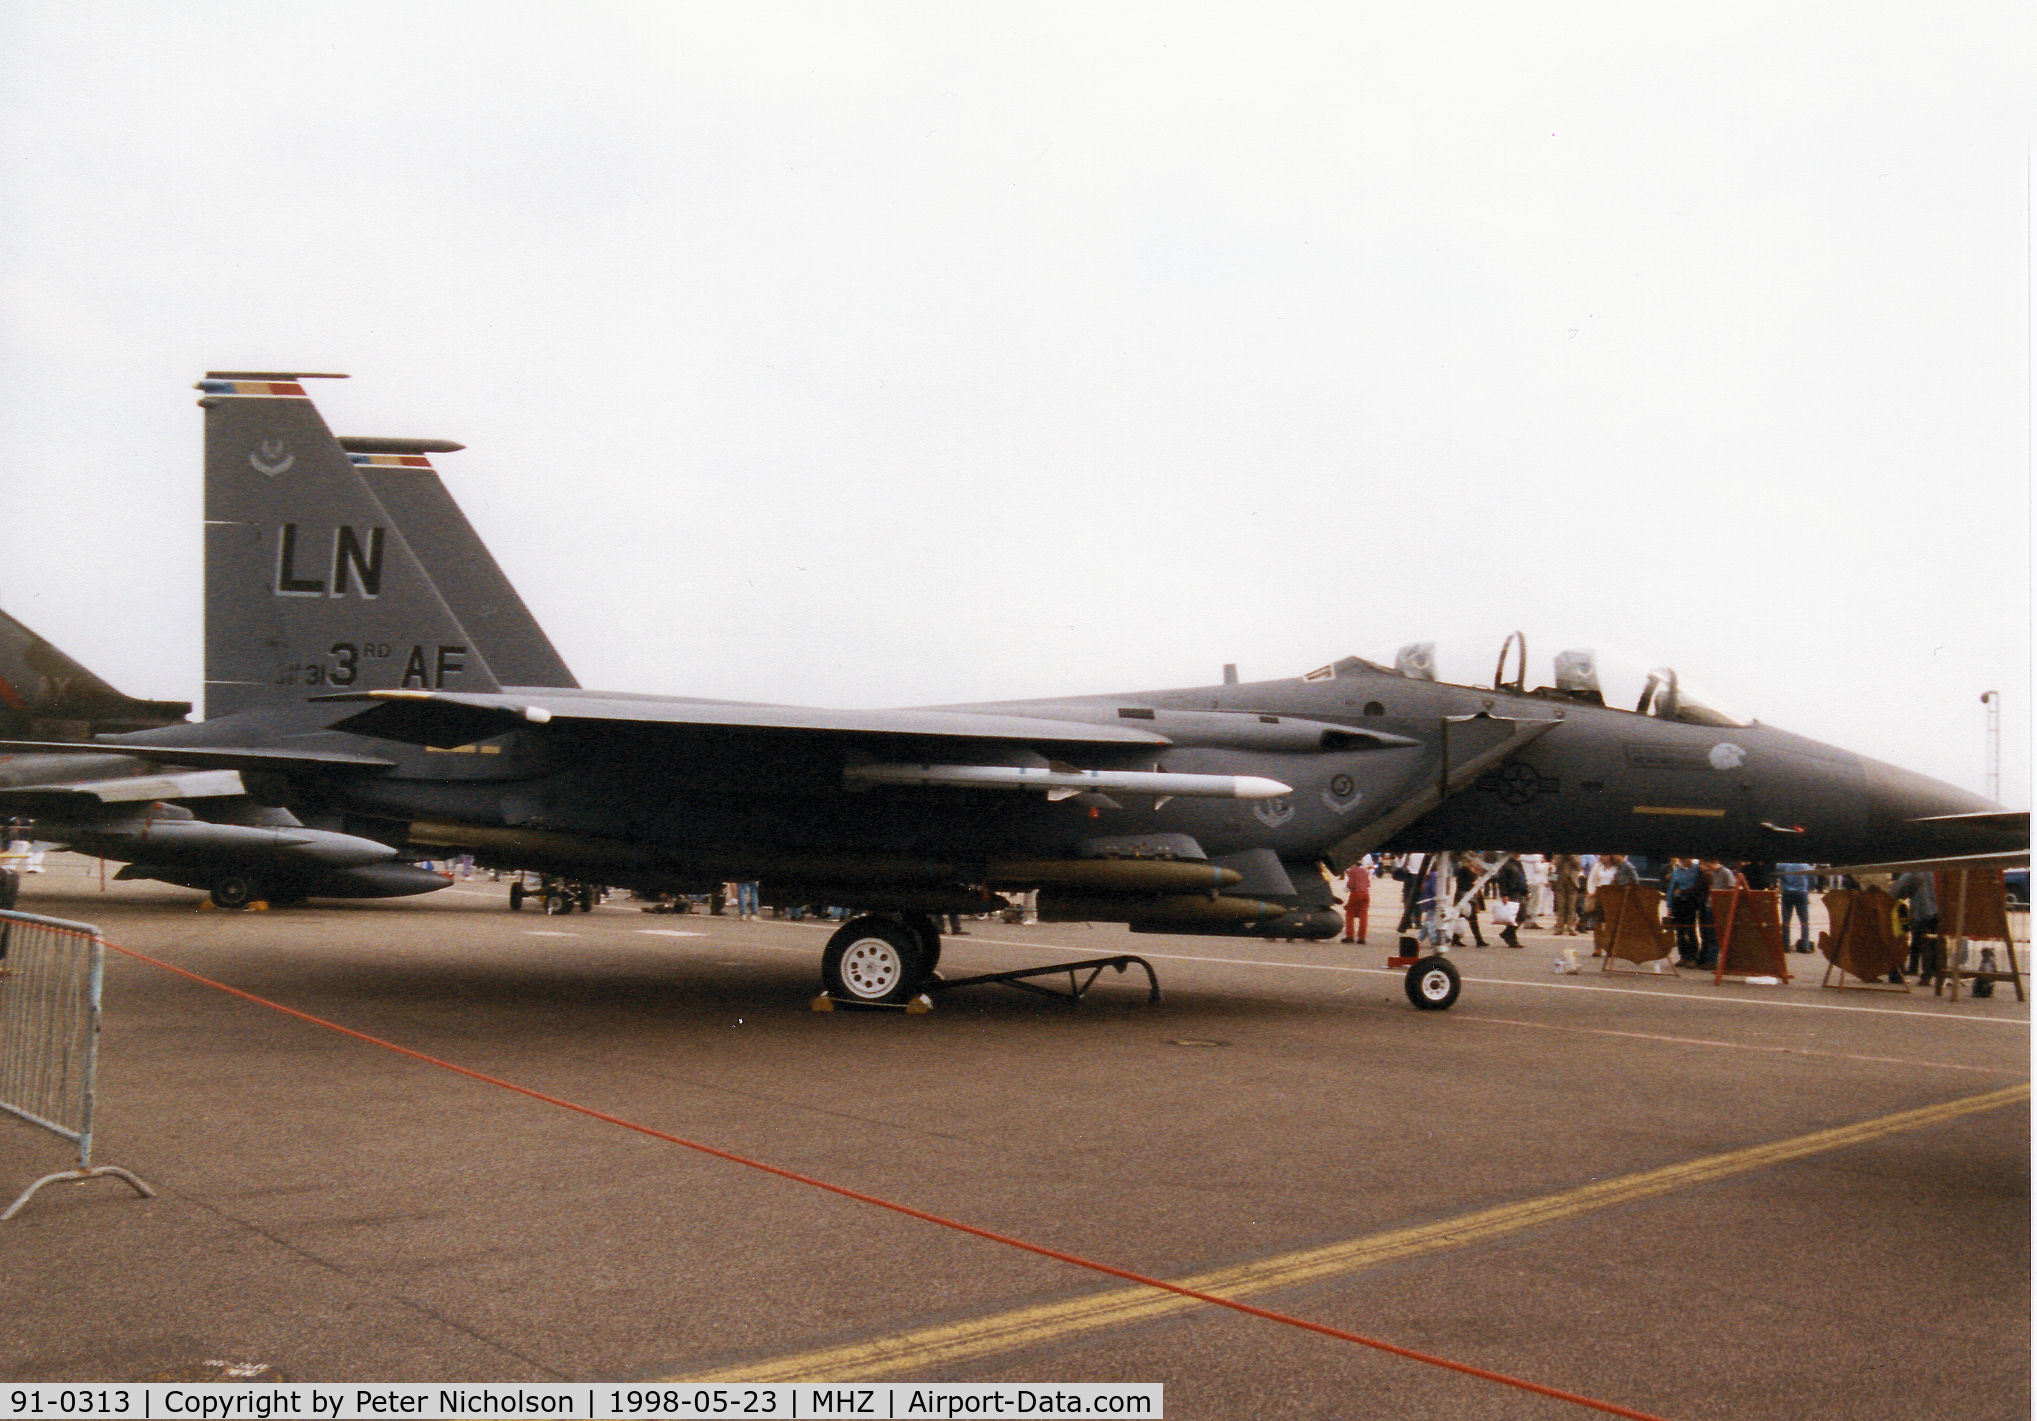 91-0313, 1991 McDonnell Douglas F-15E Strike Eagle C/N 1220/E178, F-15E Strike Eagle of RAF Lakenheath's 48th Fighter Wing with markings for the 3rd Air Force Commander on display at the 1998 RAF Mildenhall Air Fete.